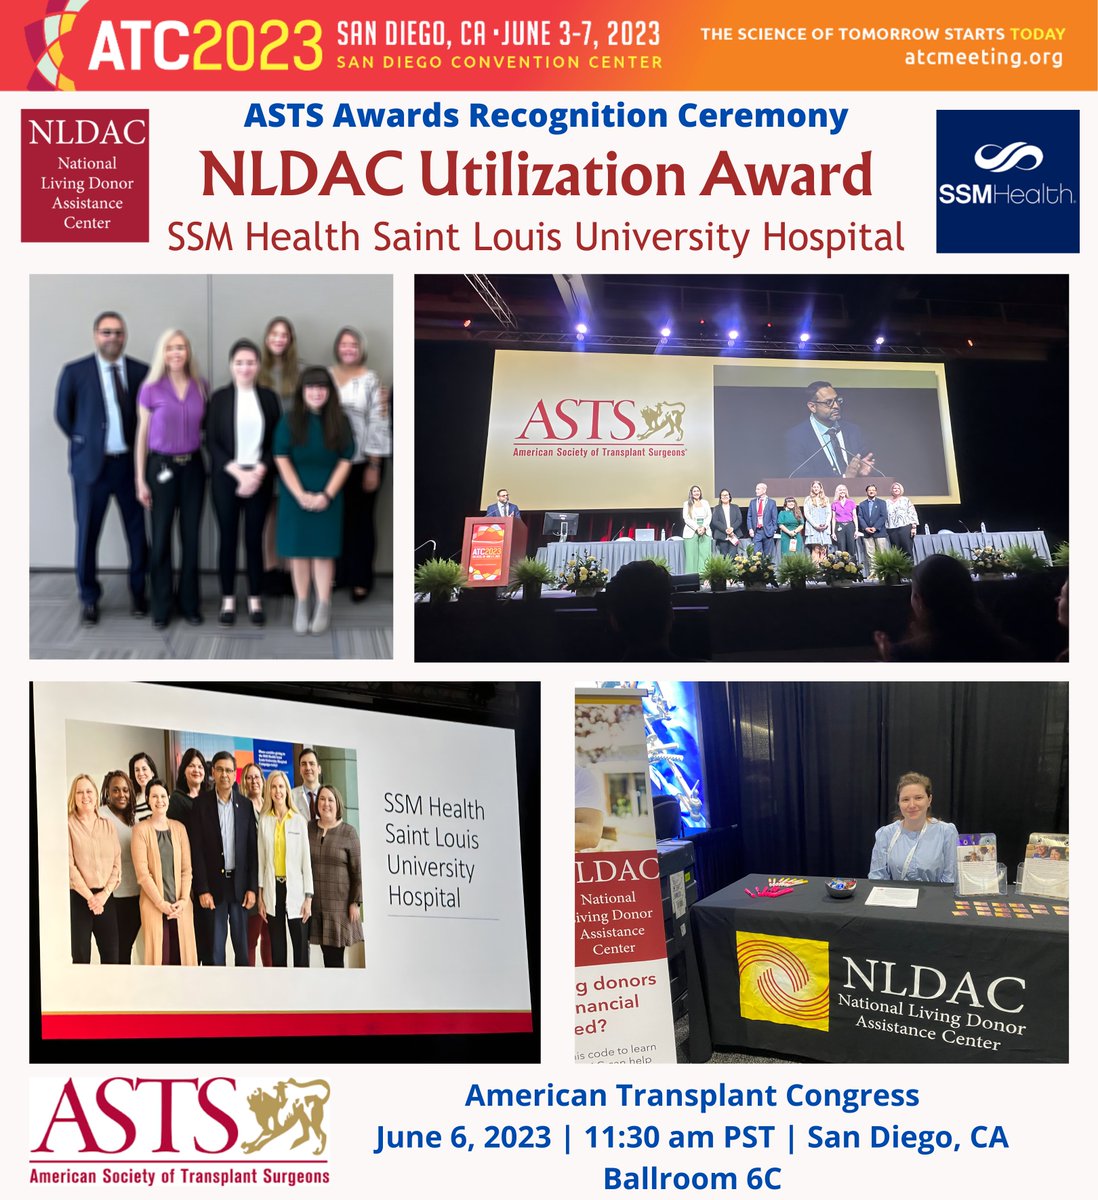 Proud to represent @SSMHealthSTL #TransplantCenter for '@NLDAC_ASTS Utilization #Award' at @ASTSChimera🏅Ceremony | 06/06/23 #ATC2023SanDiego
·🙌🏾Kudos to our #Coordinators | #SocialWorkers➕ leadership for embracing programs to reduce #FinancialDisencentives💵to #LivingDonors🤝🏽